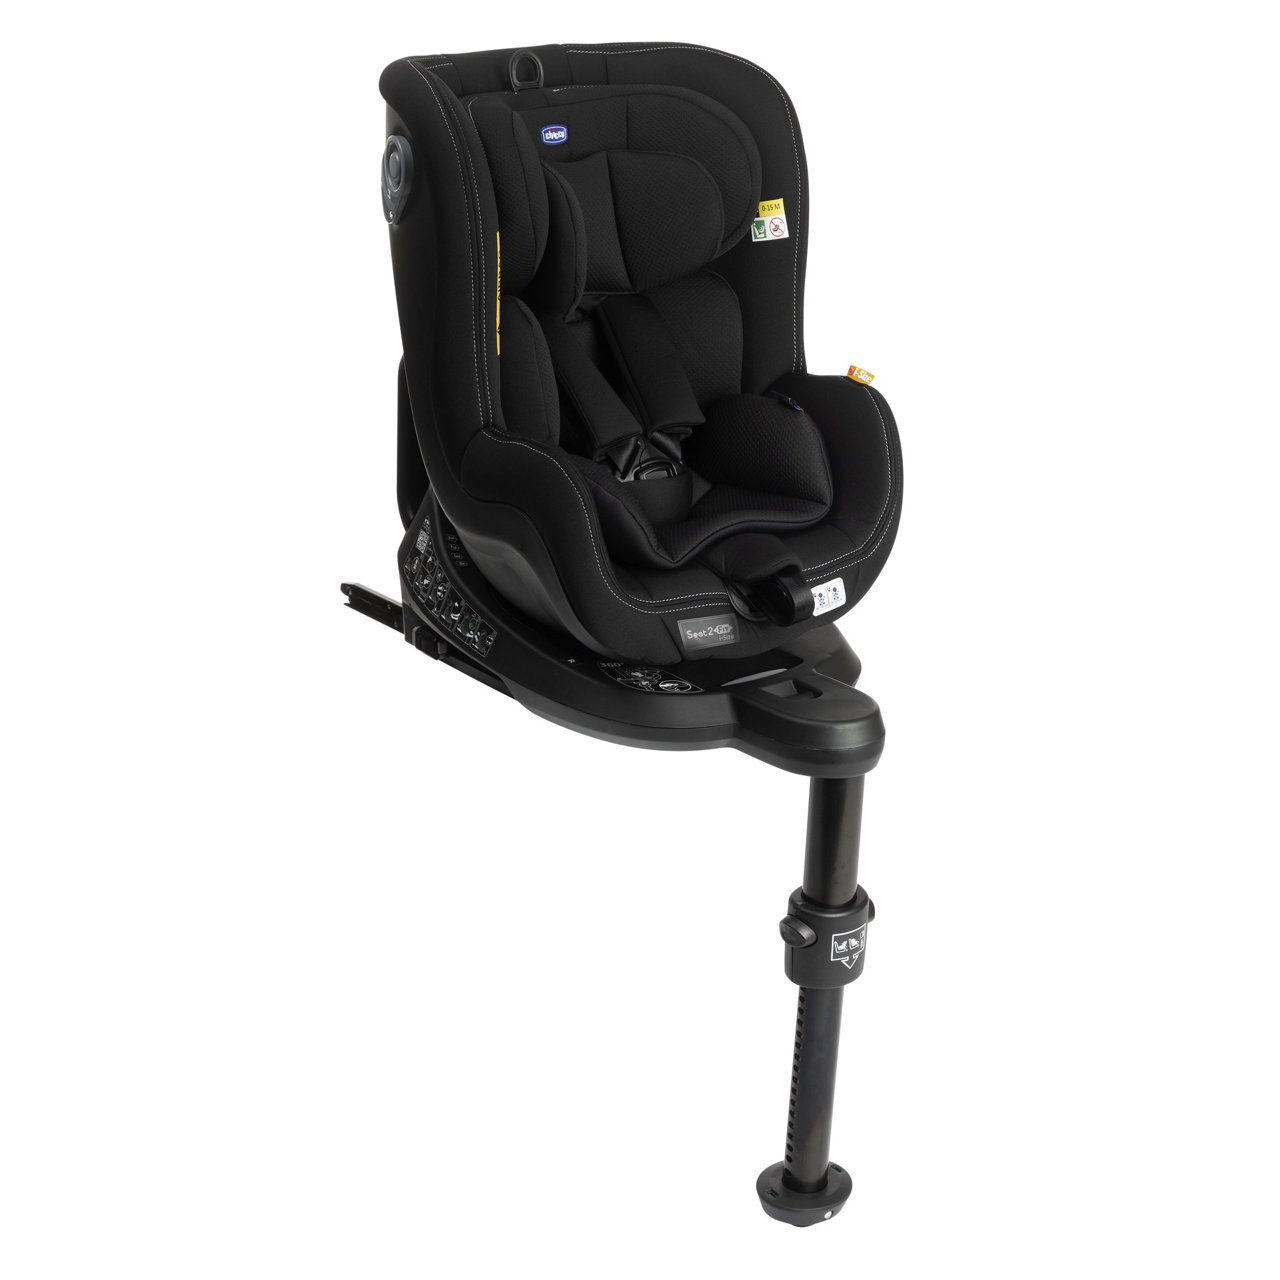 Chicco baby car seat, 2 Fit, black